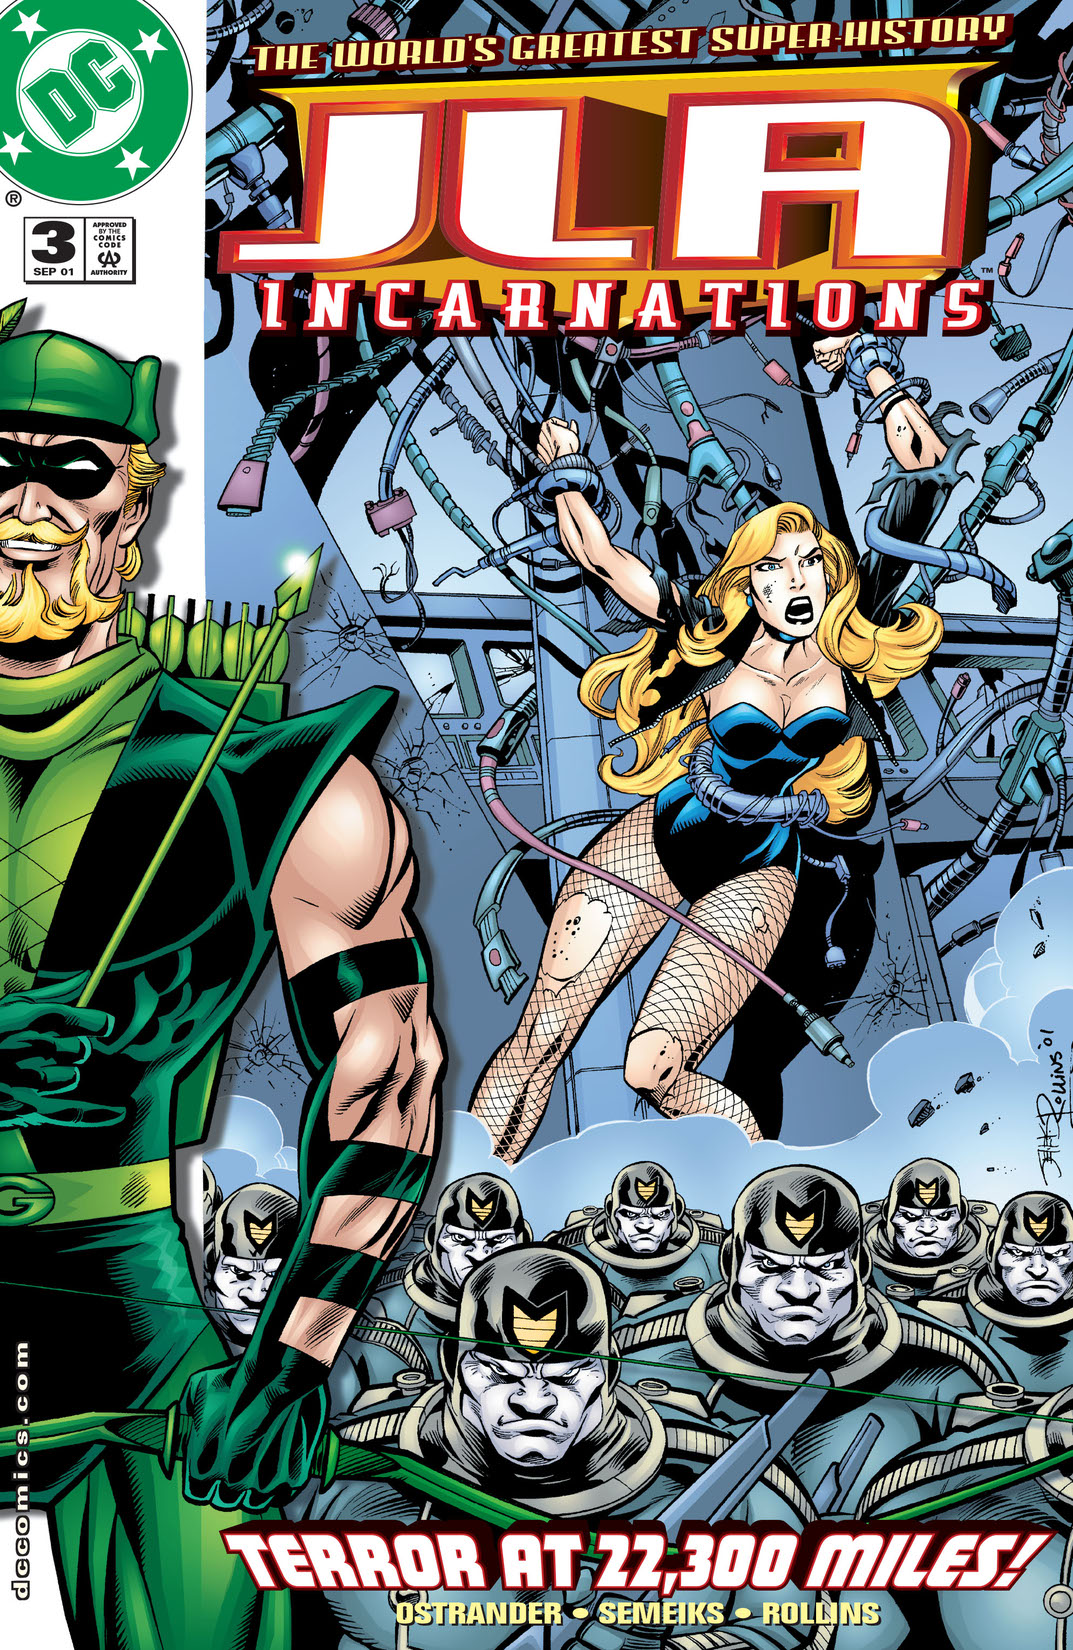 JLA: Incarnations #3 preview images